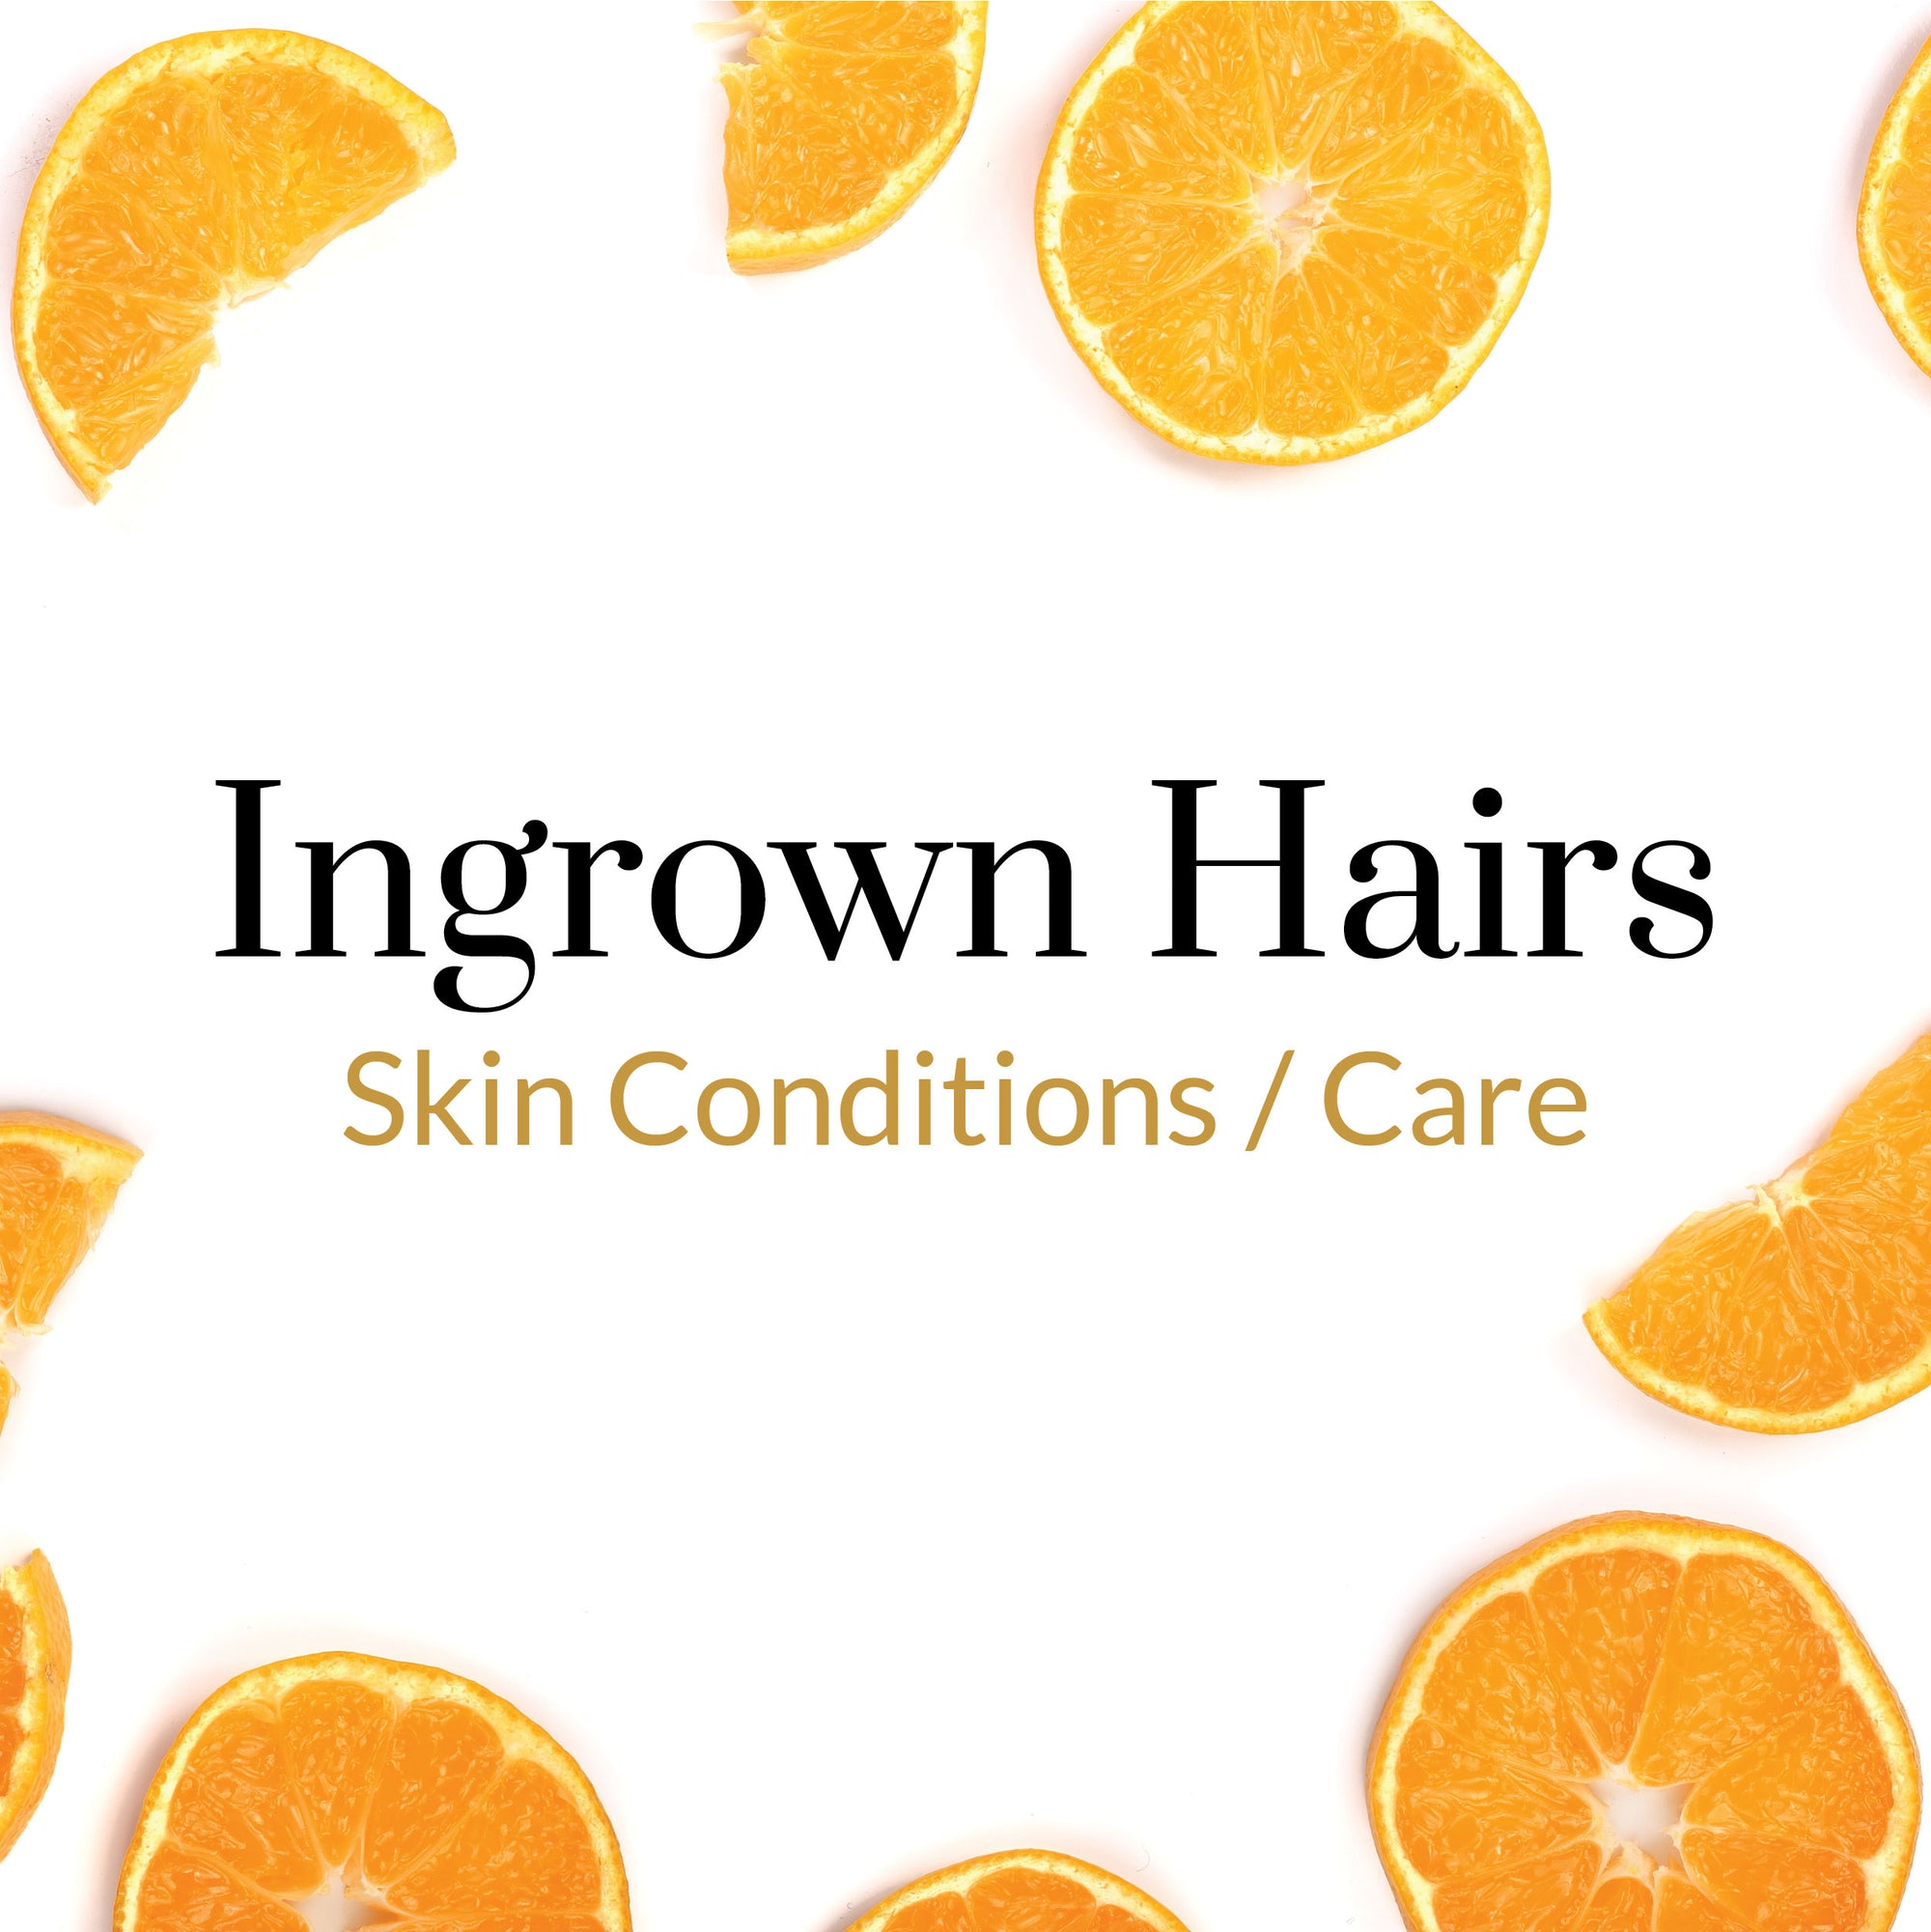 Skin Conditions/Care - Ingrown Hairs